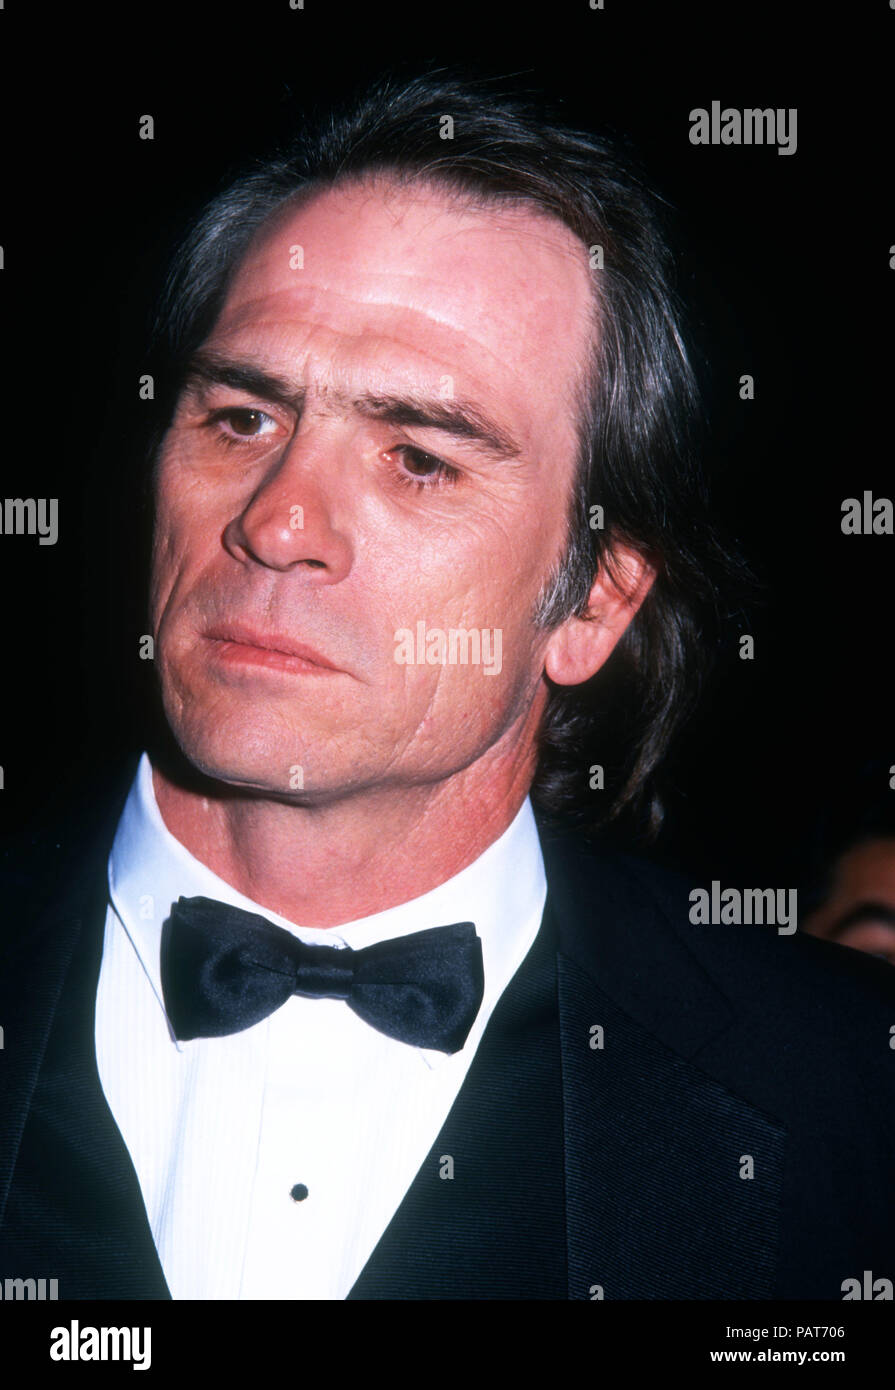 LOS ANGELES, CA - MARCH 30: Actor Tommy Lee Jones attends the 64th Annual Academy Awards on March 30, 1992 at the Dorothy Chandler Pavilion in Los Angeles, California. Photo by Barry King/Alamy Stock Photo Stock Photo